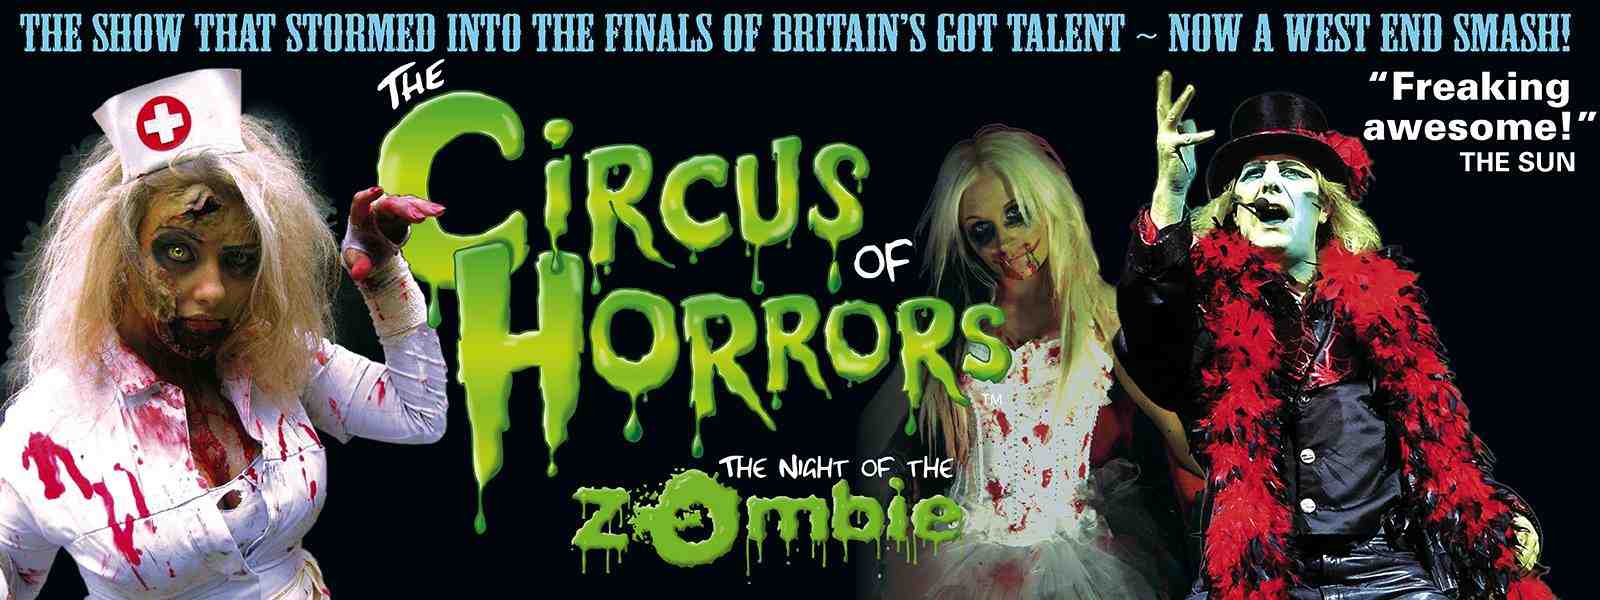 Circus of Horrors at The Bristol Hippodrome on 30 March 2015